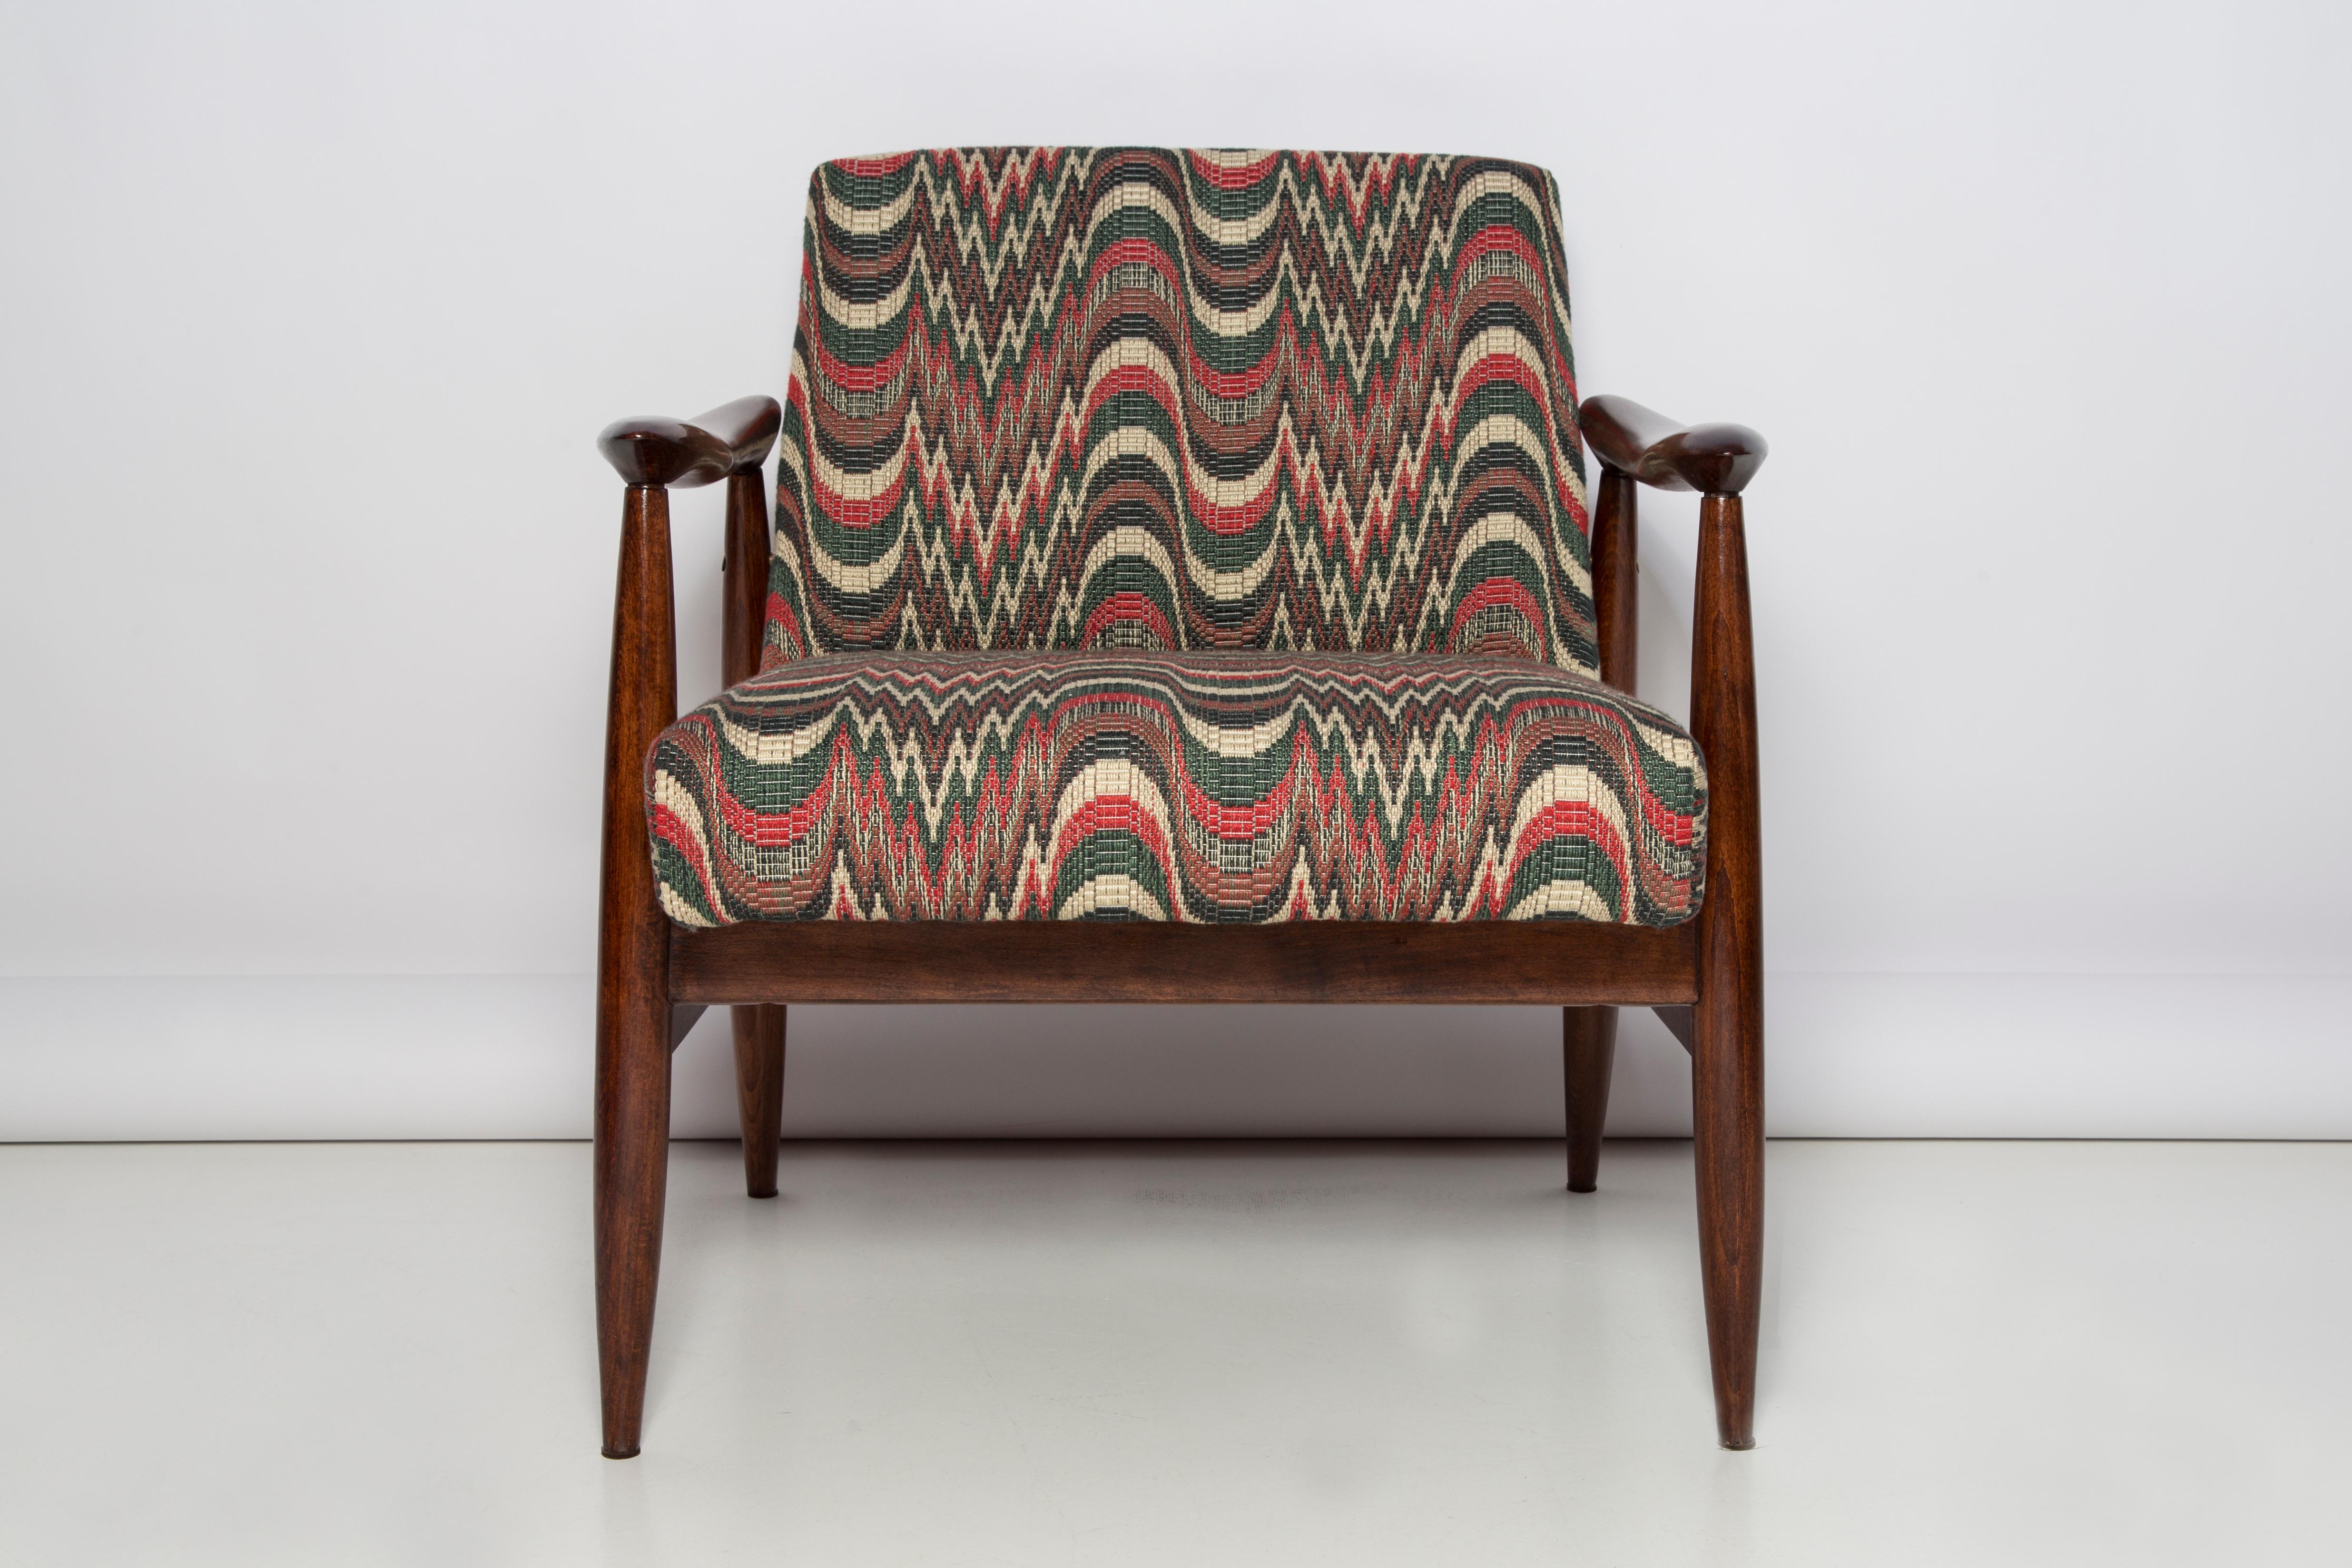 Hand-Crafted Mid Century Flimflam Jacquard Armchair, Designed by J Kedziorek, Europe, 1960s For Sale